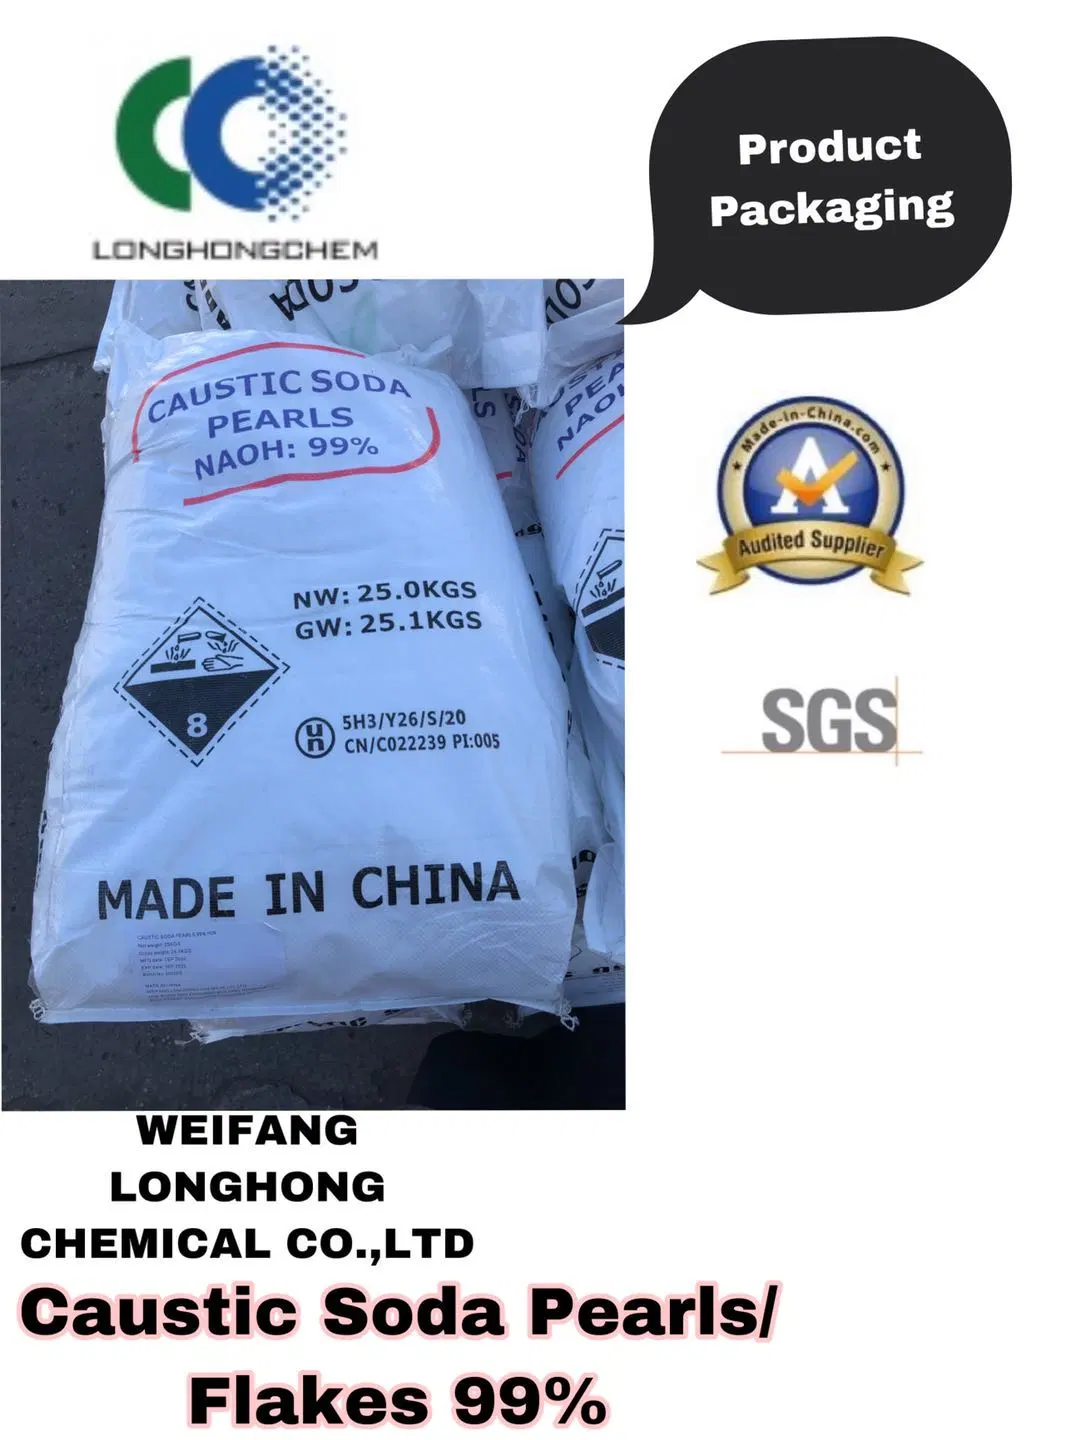 Refines Petroleum Products / Used in Oil Field Drilling Mud Caustic Soda Pearls